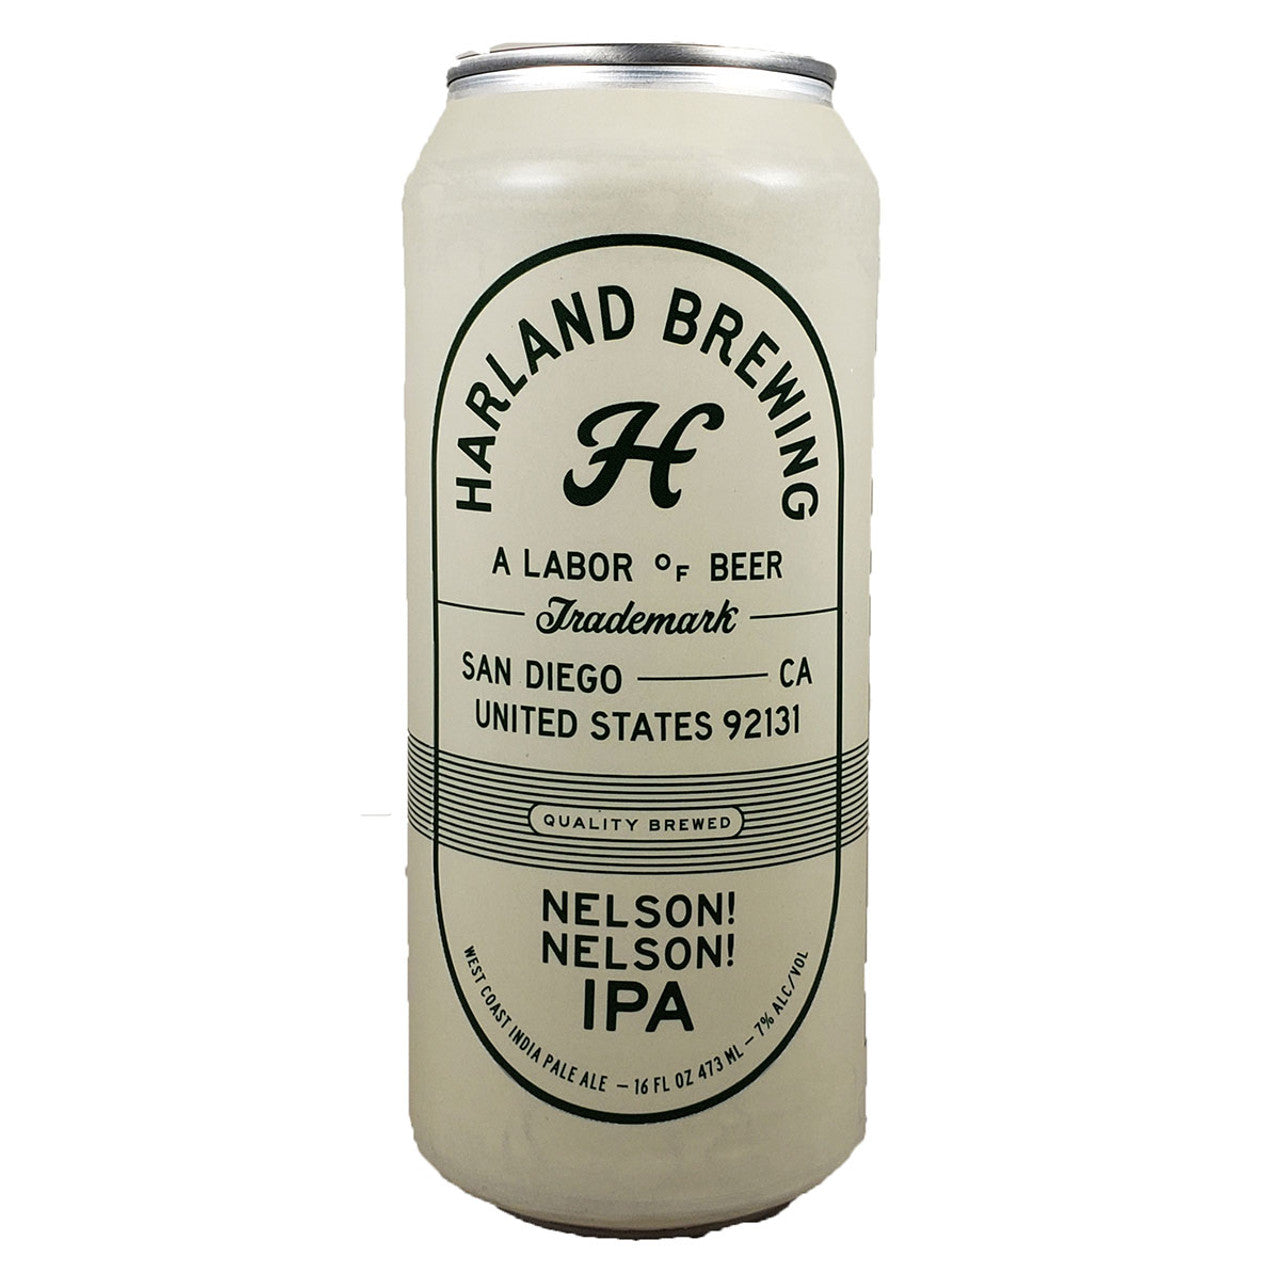 Harland Brewing Nelson! Nelson! IPA 4-Pack (16 FL OZ Per Can)